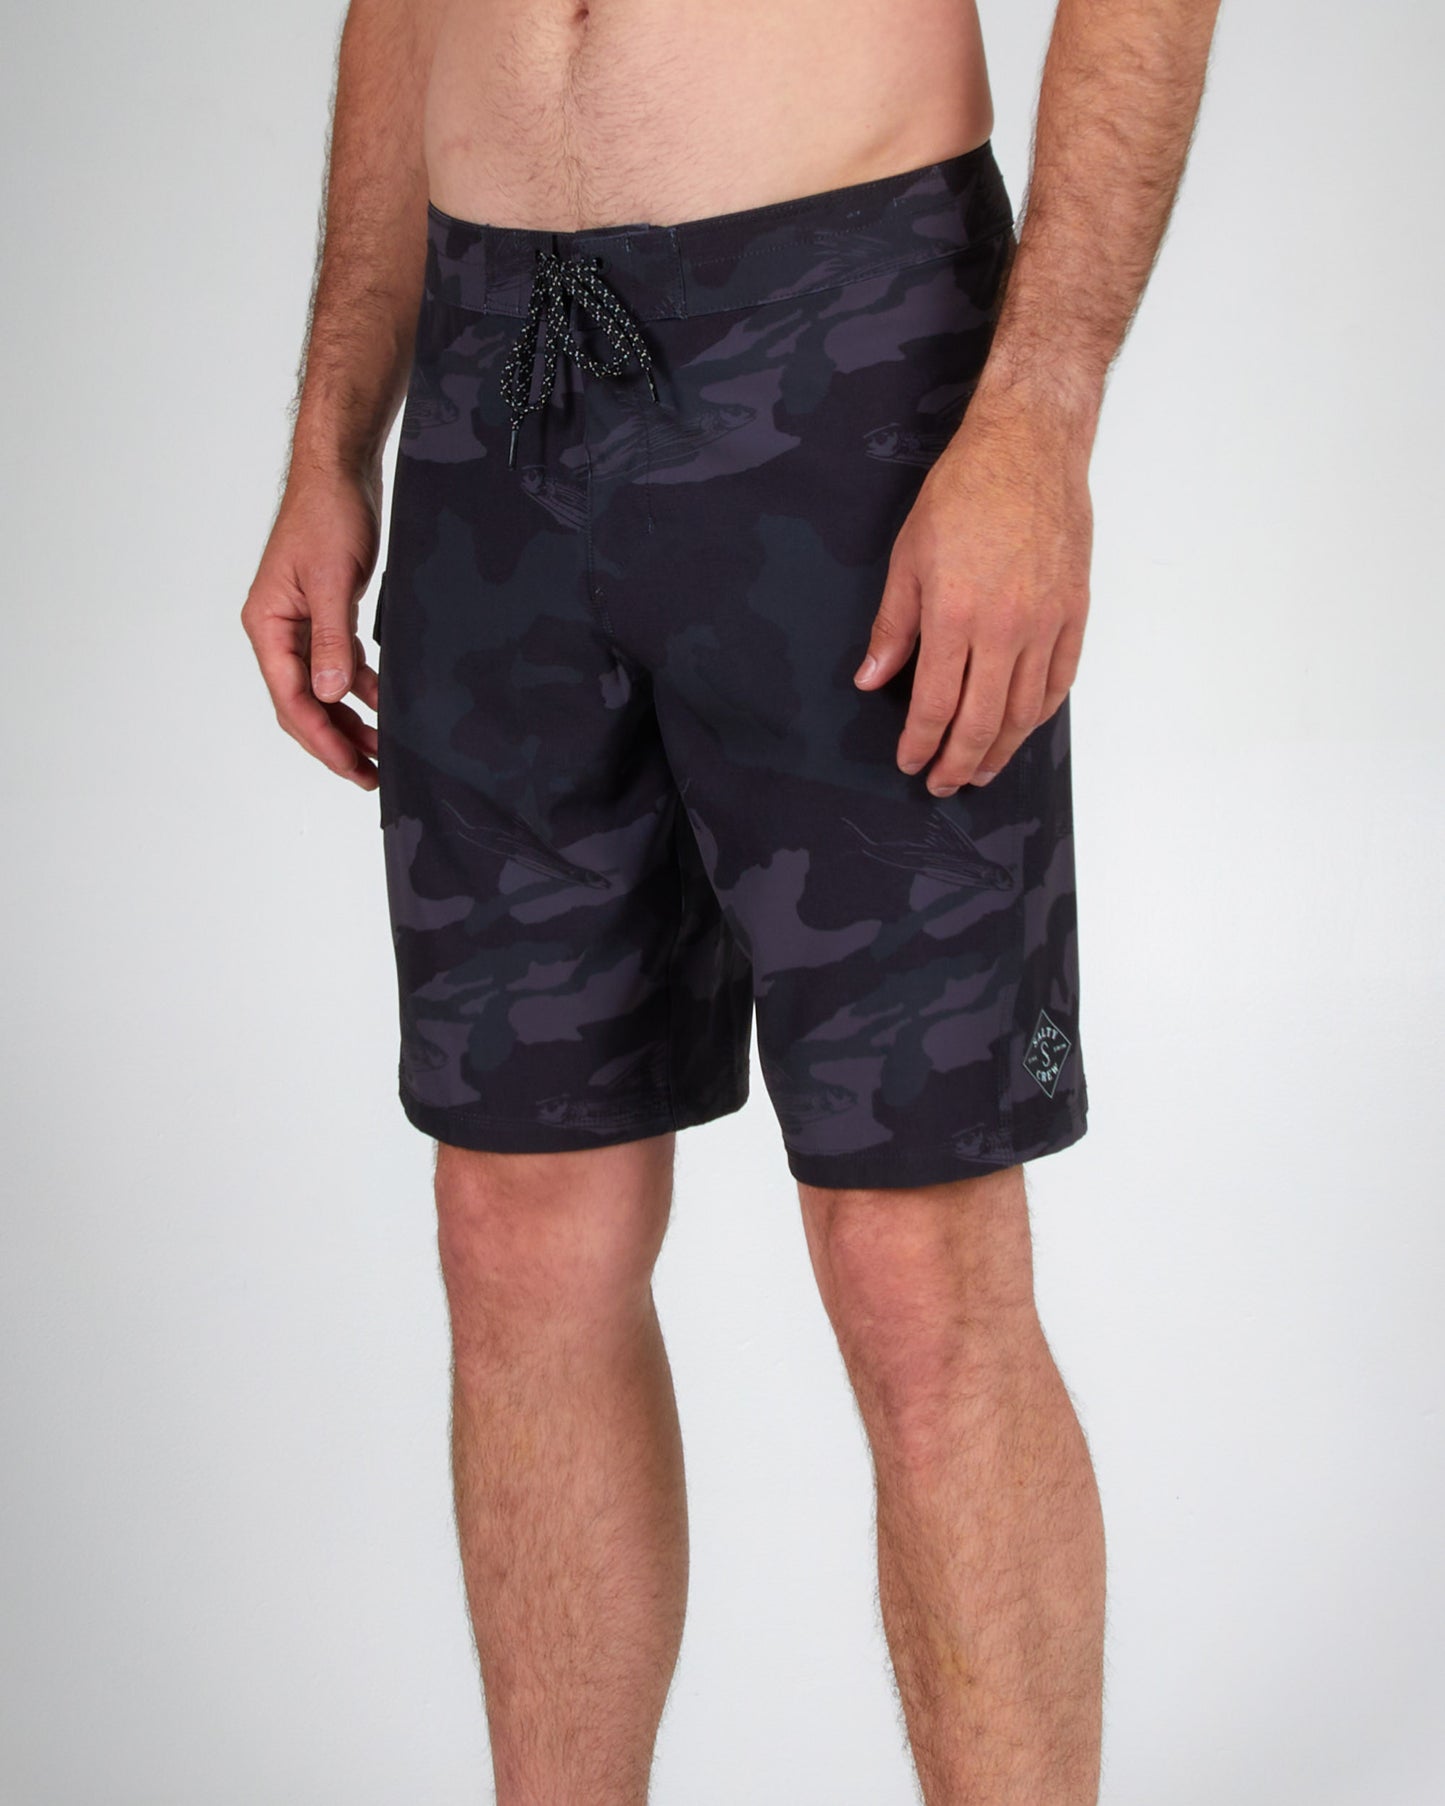 on body front angle of the Lowtide Black Camo Boardshort